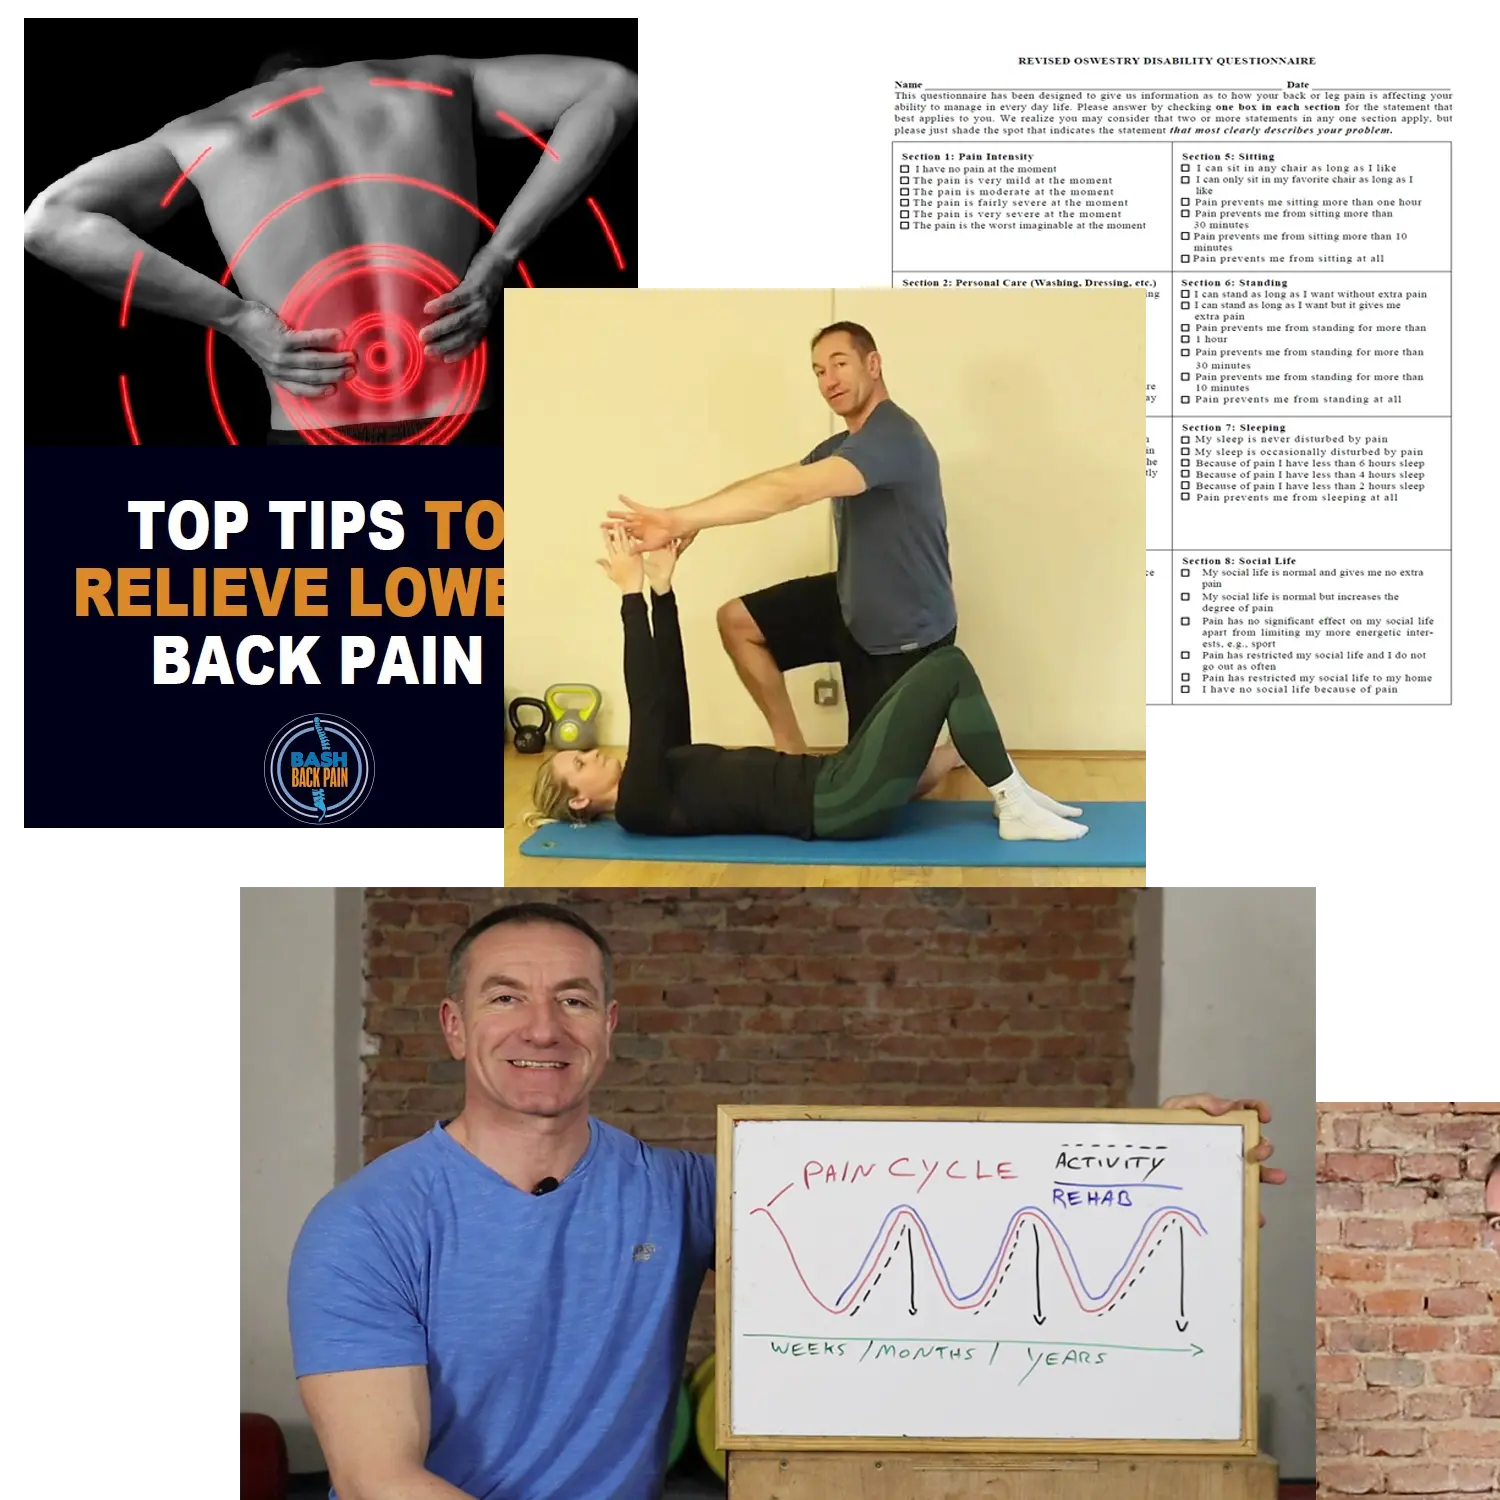 lower back recovery course material display